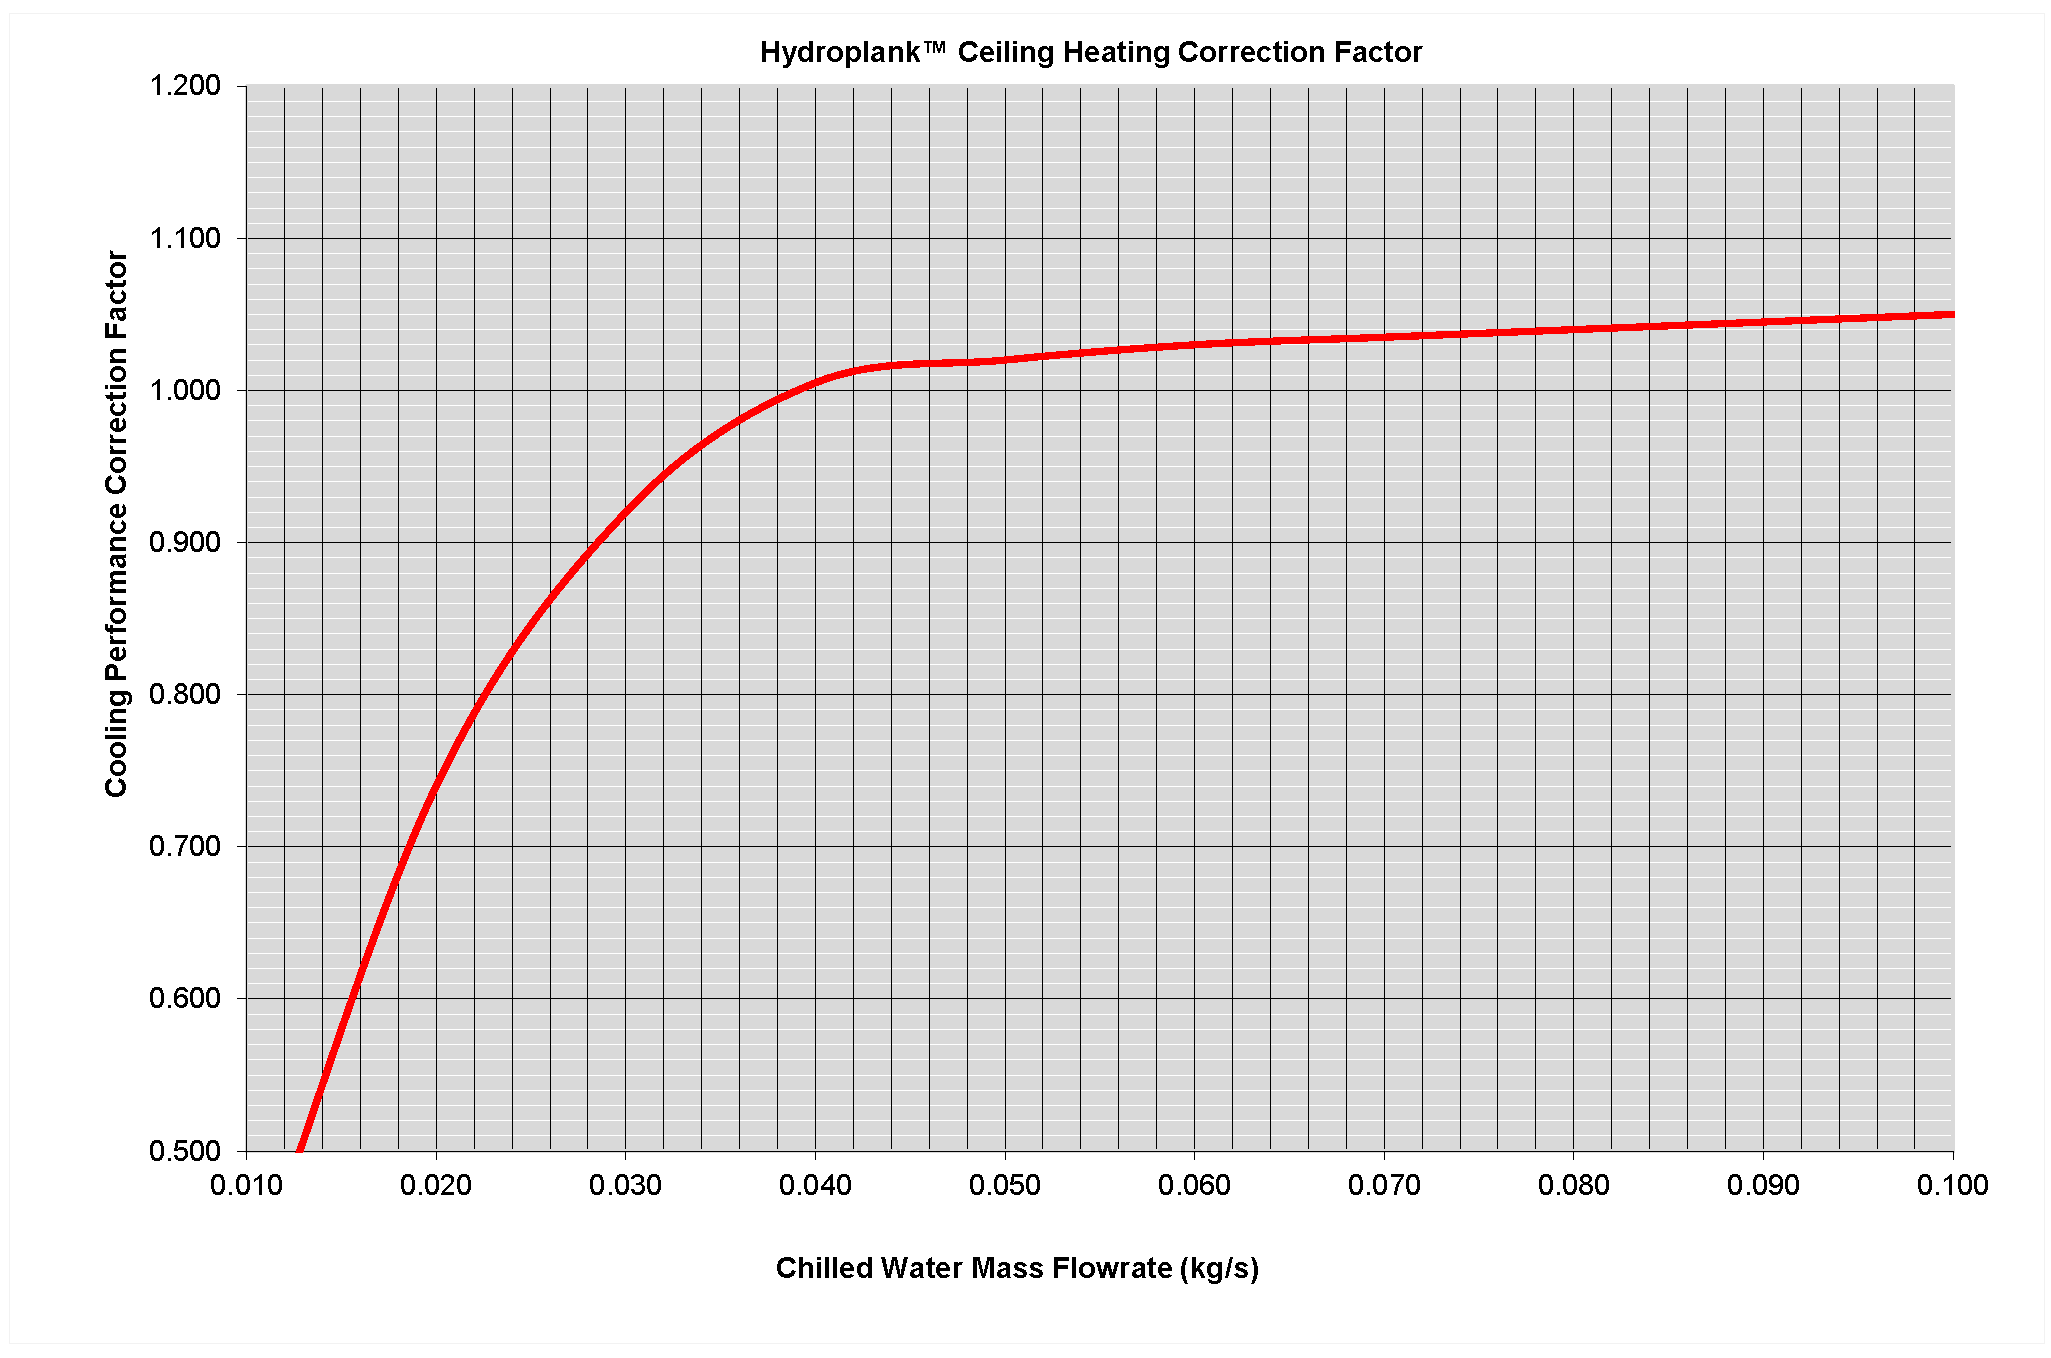 A line chart produced in-house by Frenger showing the Heating Correction Factor of the Hydroplank™